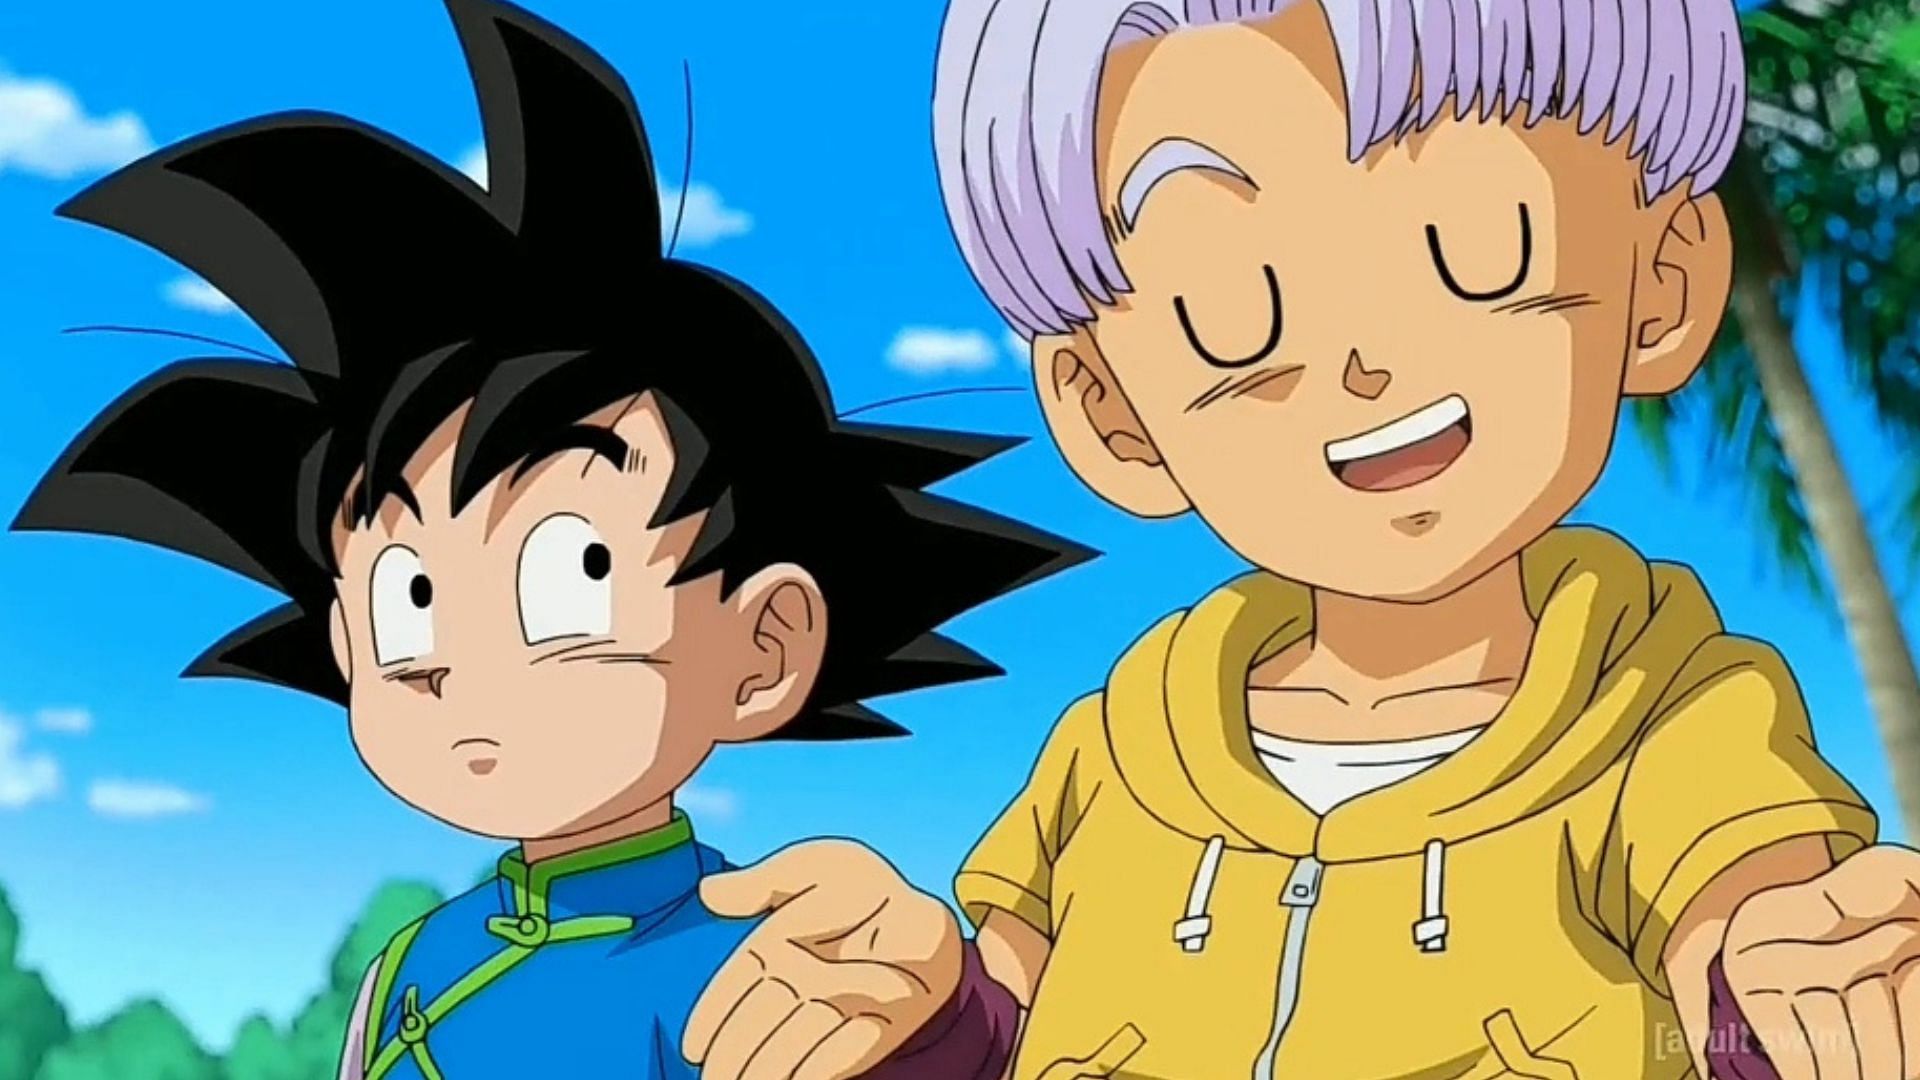 Young Goten and Trunks as seen in the Dragon Ball anime (Image via Toei Animation)